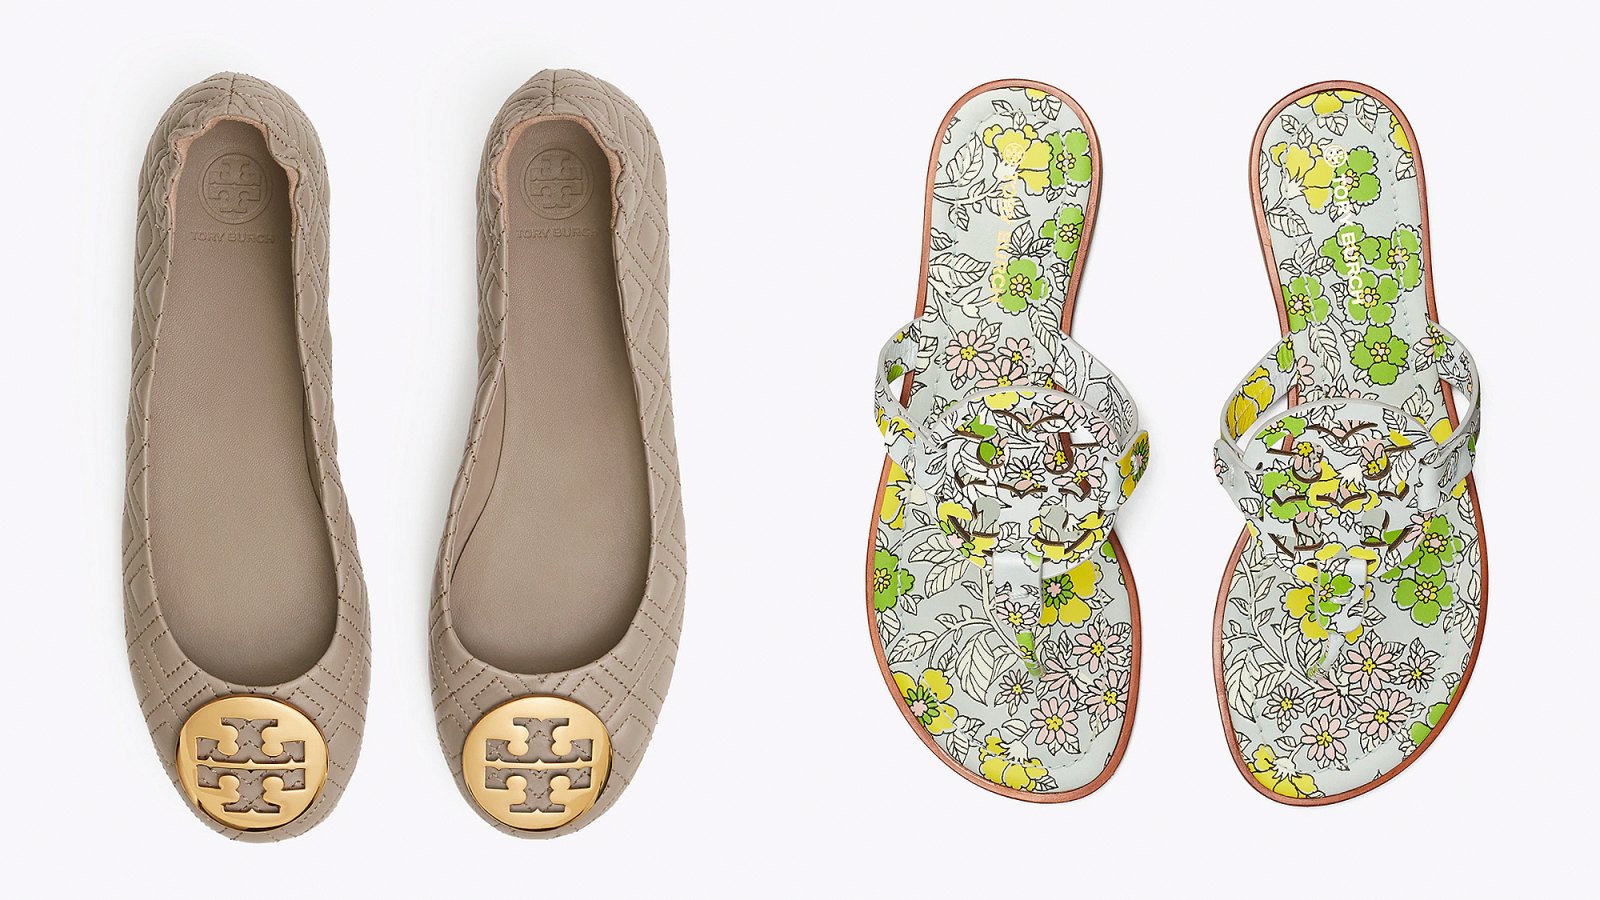 Tory Burch Has So Many Bestselling Shoes and Sandals on Sale